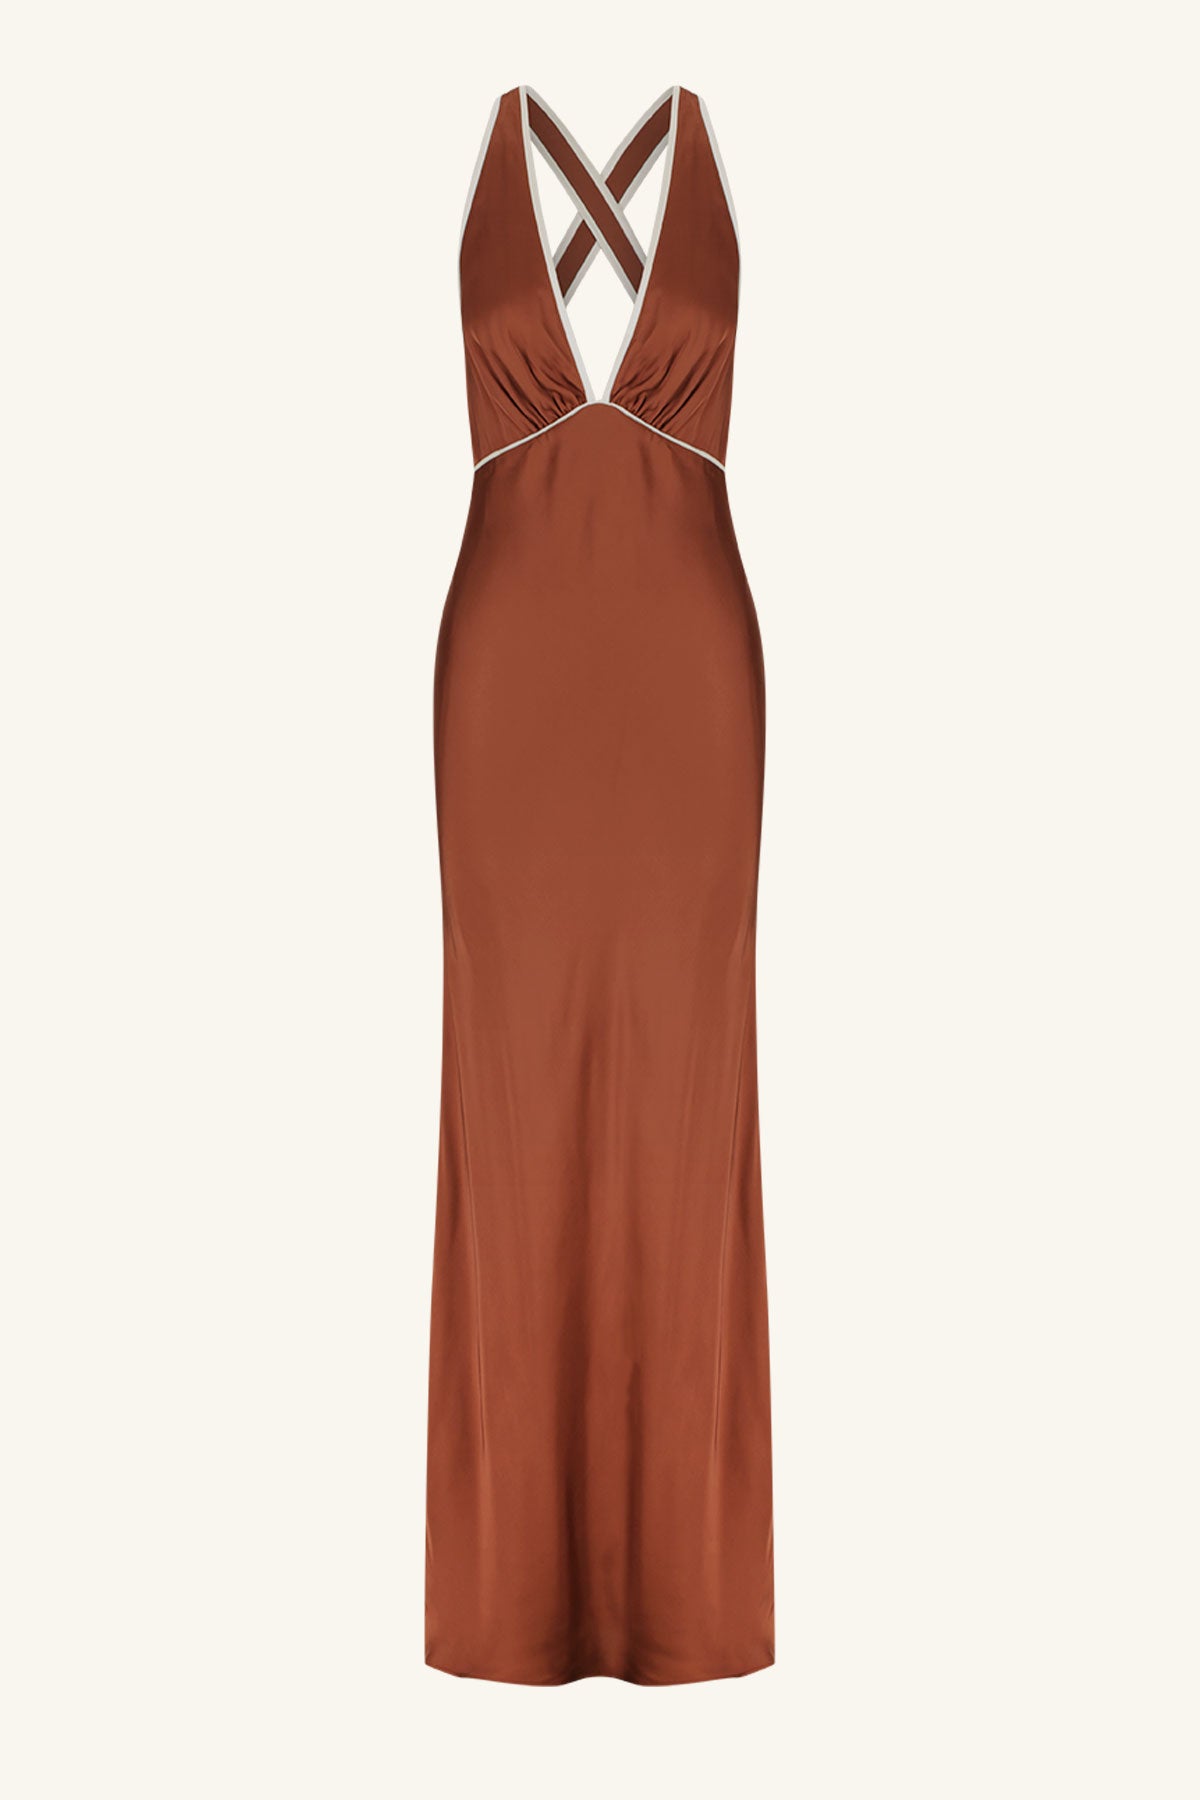 Belkis Contrast Plunged Cross Back Maxi Dress